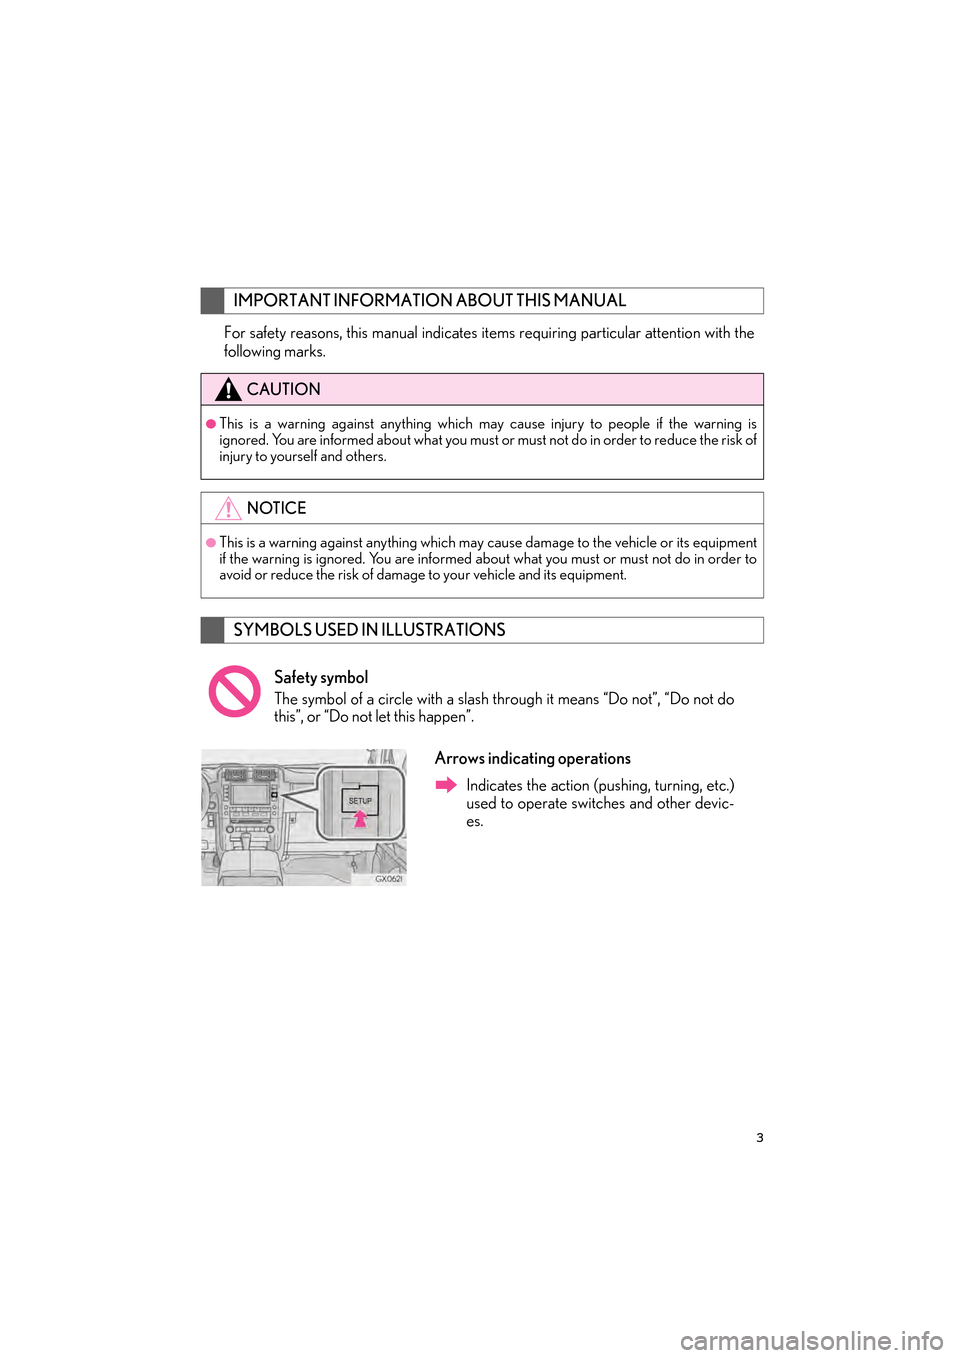 Lexus GX460 2014  Navigation Manual 3
GX_EMVN_OM60K84U_(U)13.07.02     11:50
For safety reasons, this manual indicates items requiring particular attention with the
following marks.
IMPORTANT INFORMATION ABOUT THIS MANUAL
CAUTION
●Thi